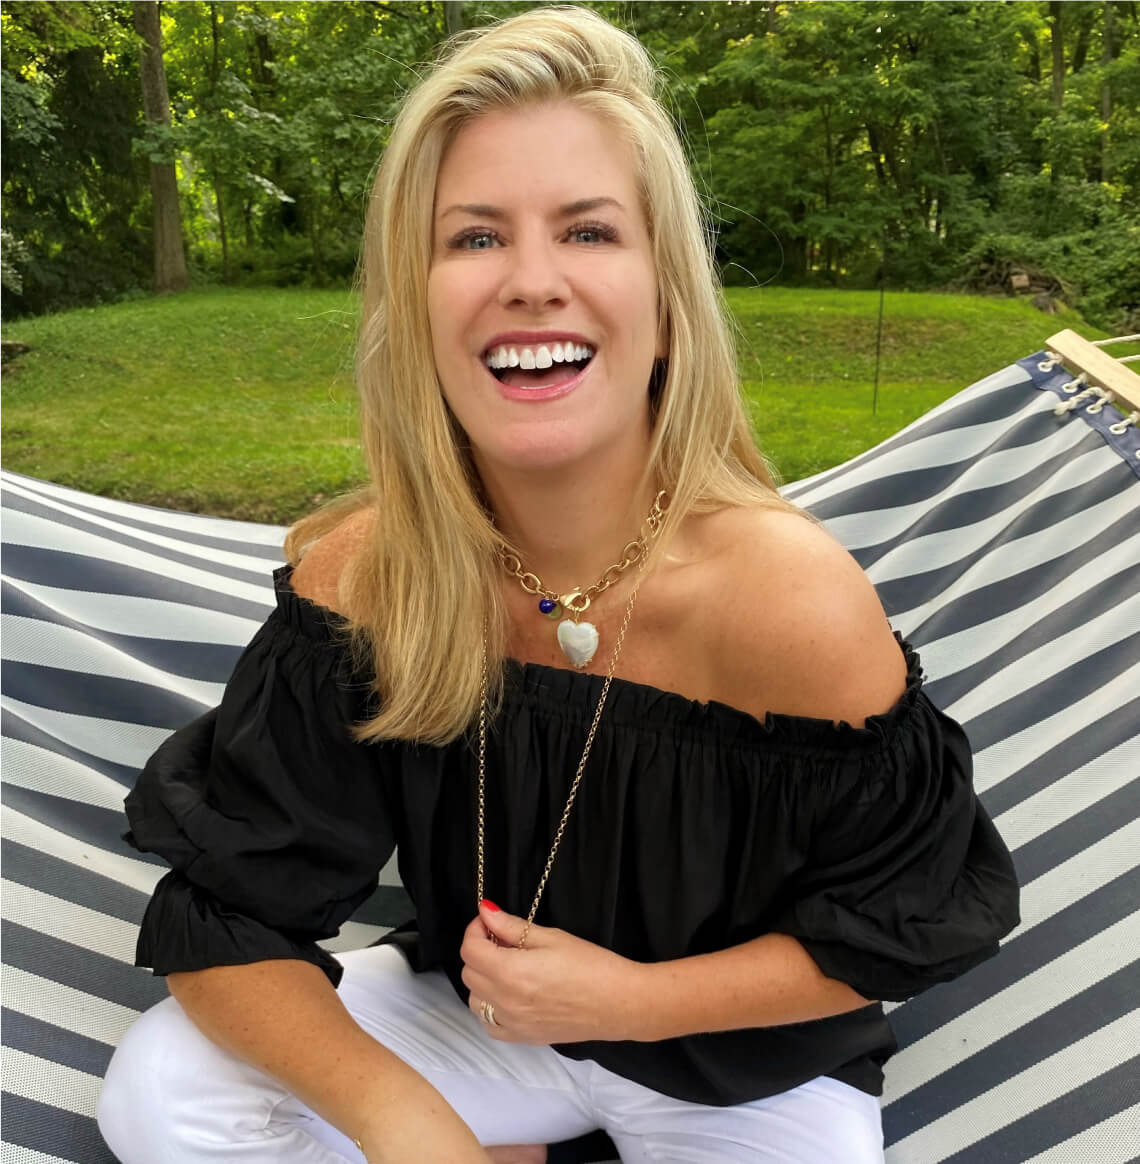 Owner Jane Win wearing her necklaces and a MERSEA black tulum top with white jeans sitting on a hammock